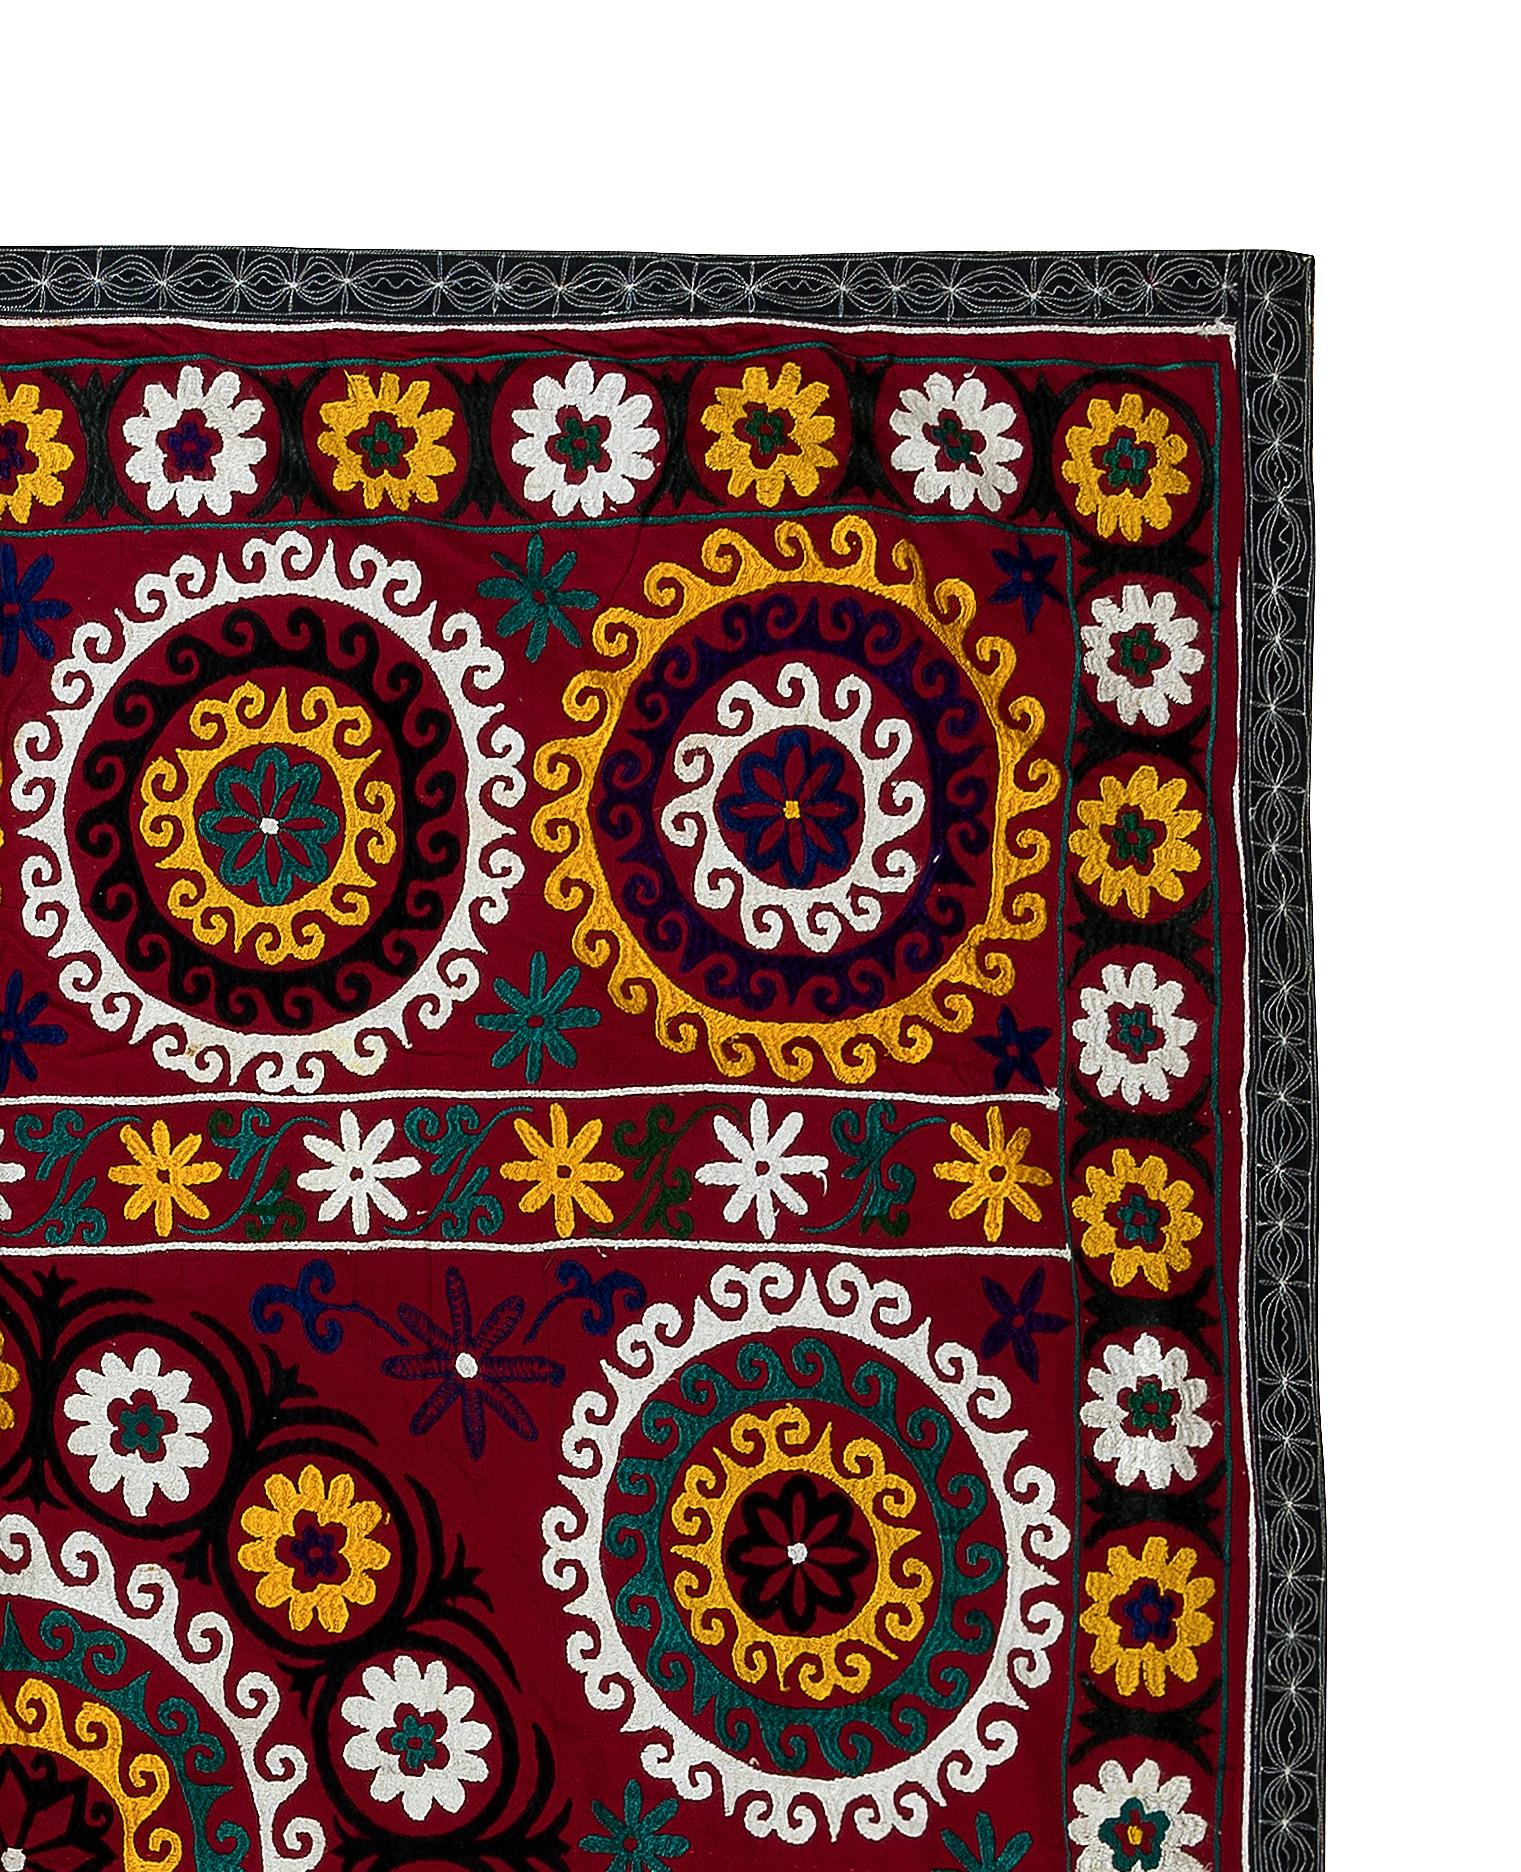 Uzbek 5.3x6 Ft Gorgeous Silk Suzani Wall Hanging in Red, Hand Embroidery Vintage Throw For Sale